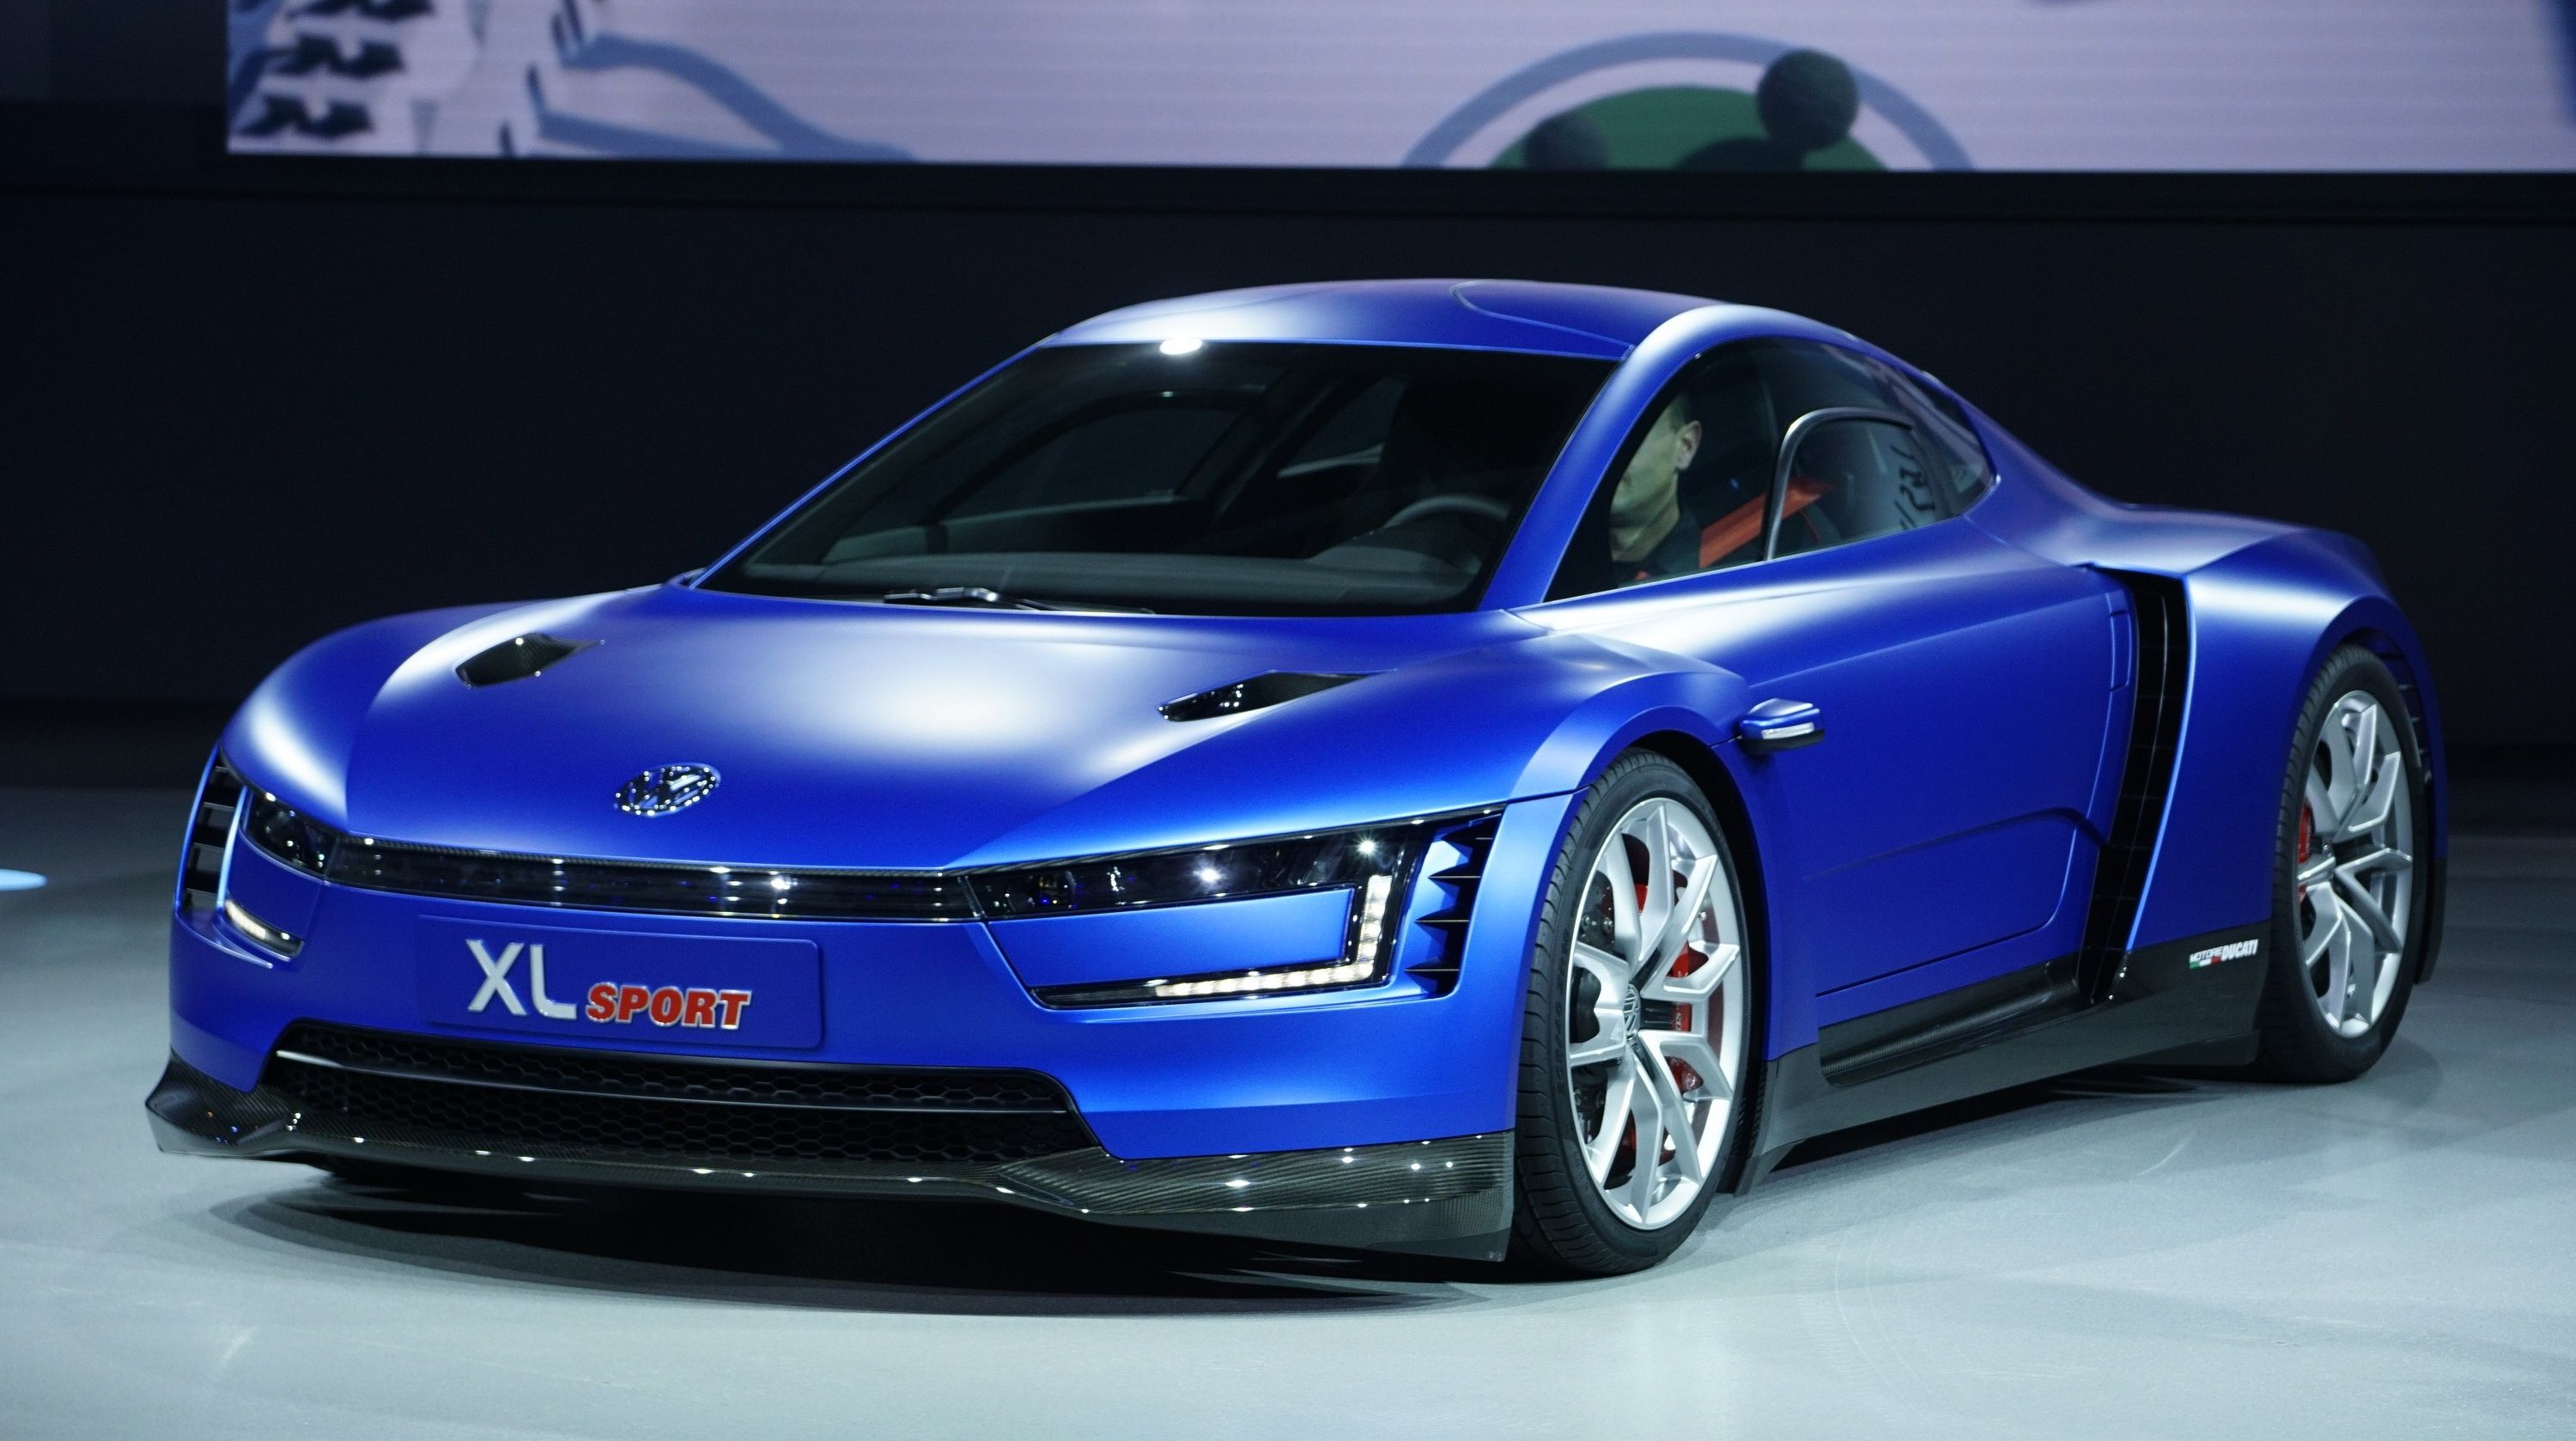  Meet the Ducatti-powered Volkswagen XL Sport, the XL1's faster-moving sister. 